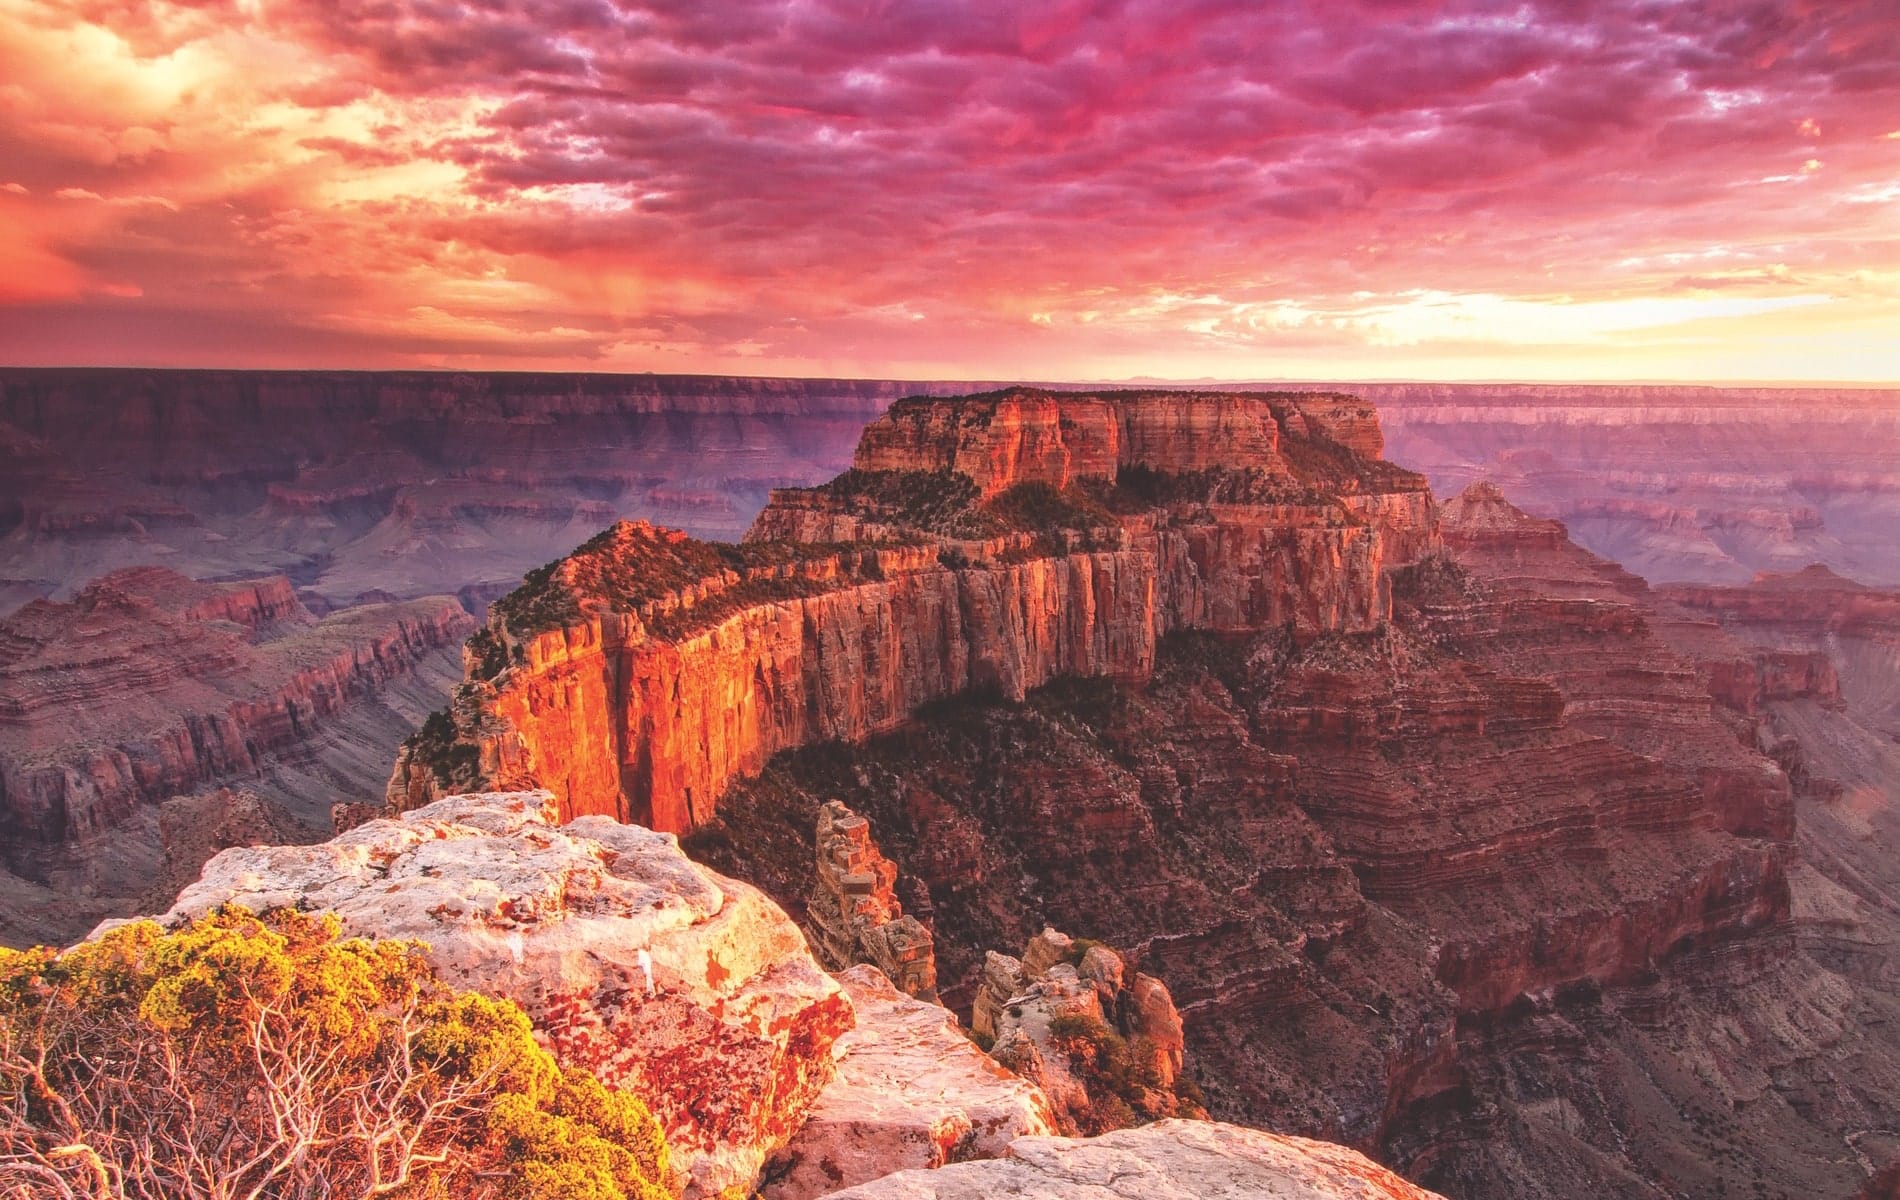 Incredible view from Cape Royal on the Grand Canyon’s North Rim